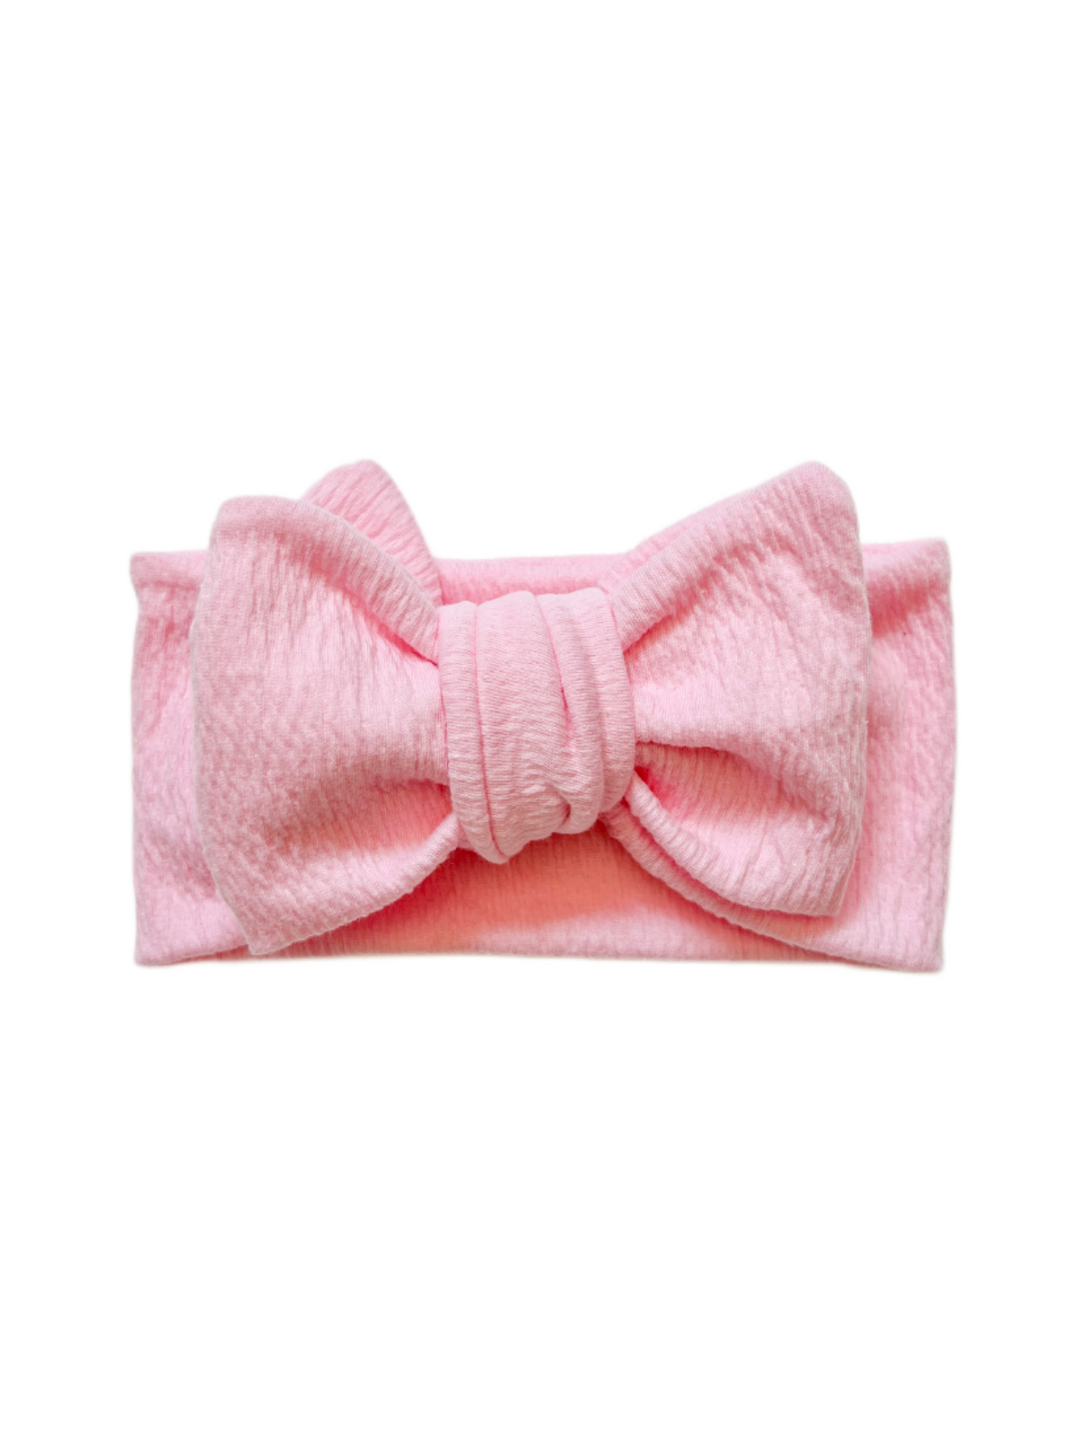 Oversized Crinkle Knit Bow - Candy Floss